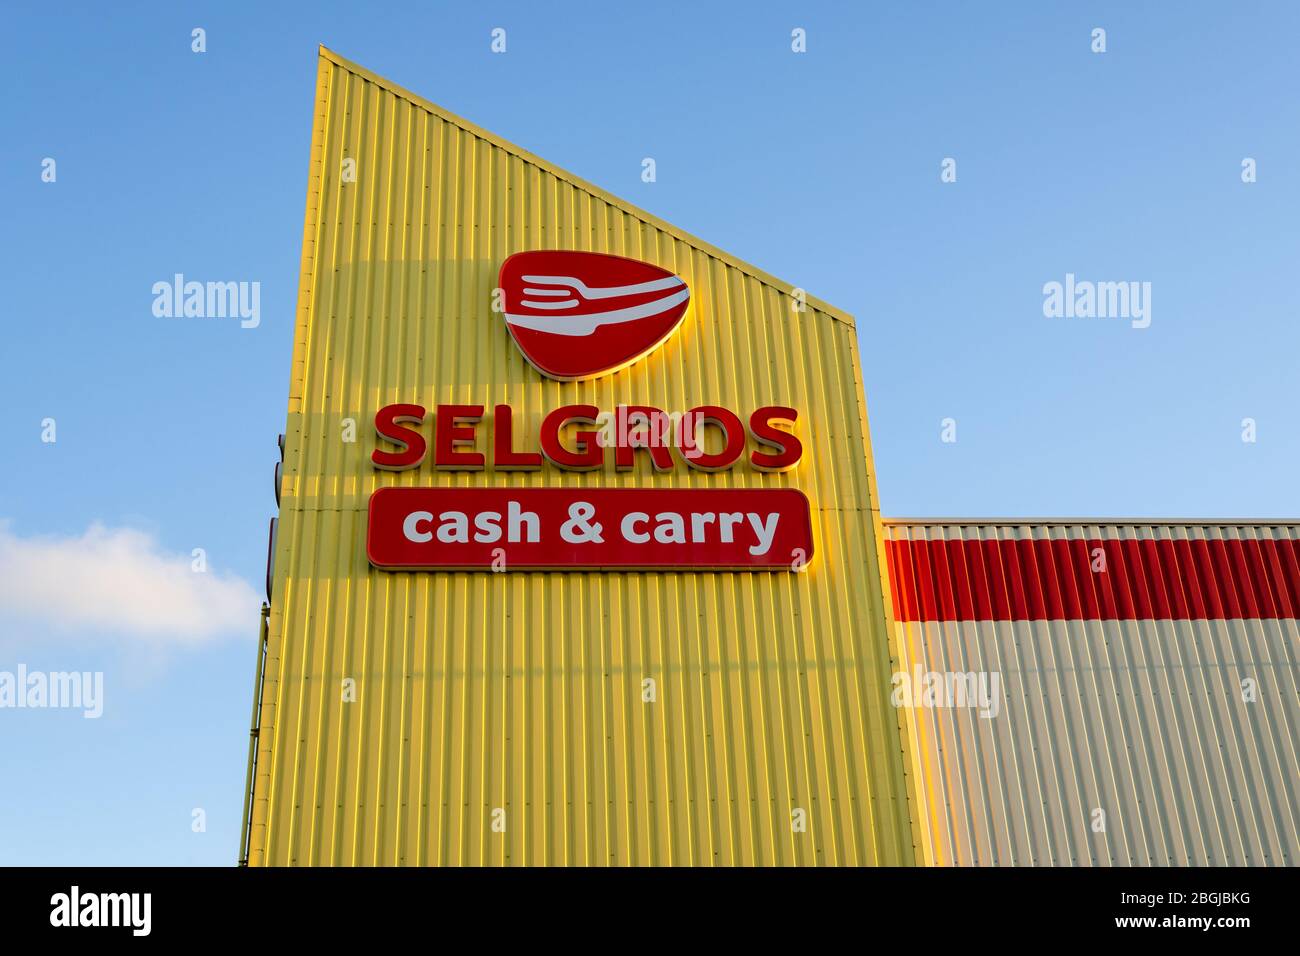 Gdansk, Poland - April 21, 2020: Selgros company logo in front of  supermarket. Selgros is a cash & carry chain in Europe Stock Photo - Alamy